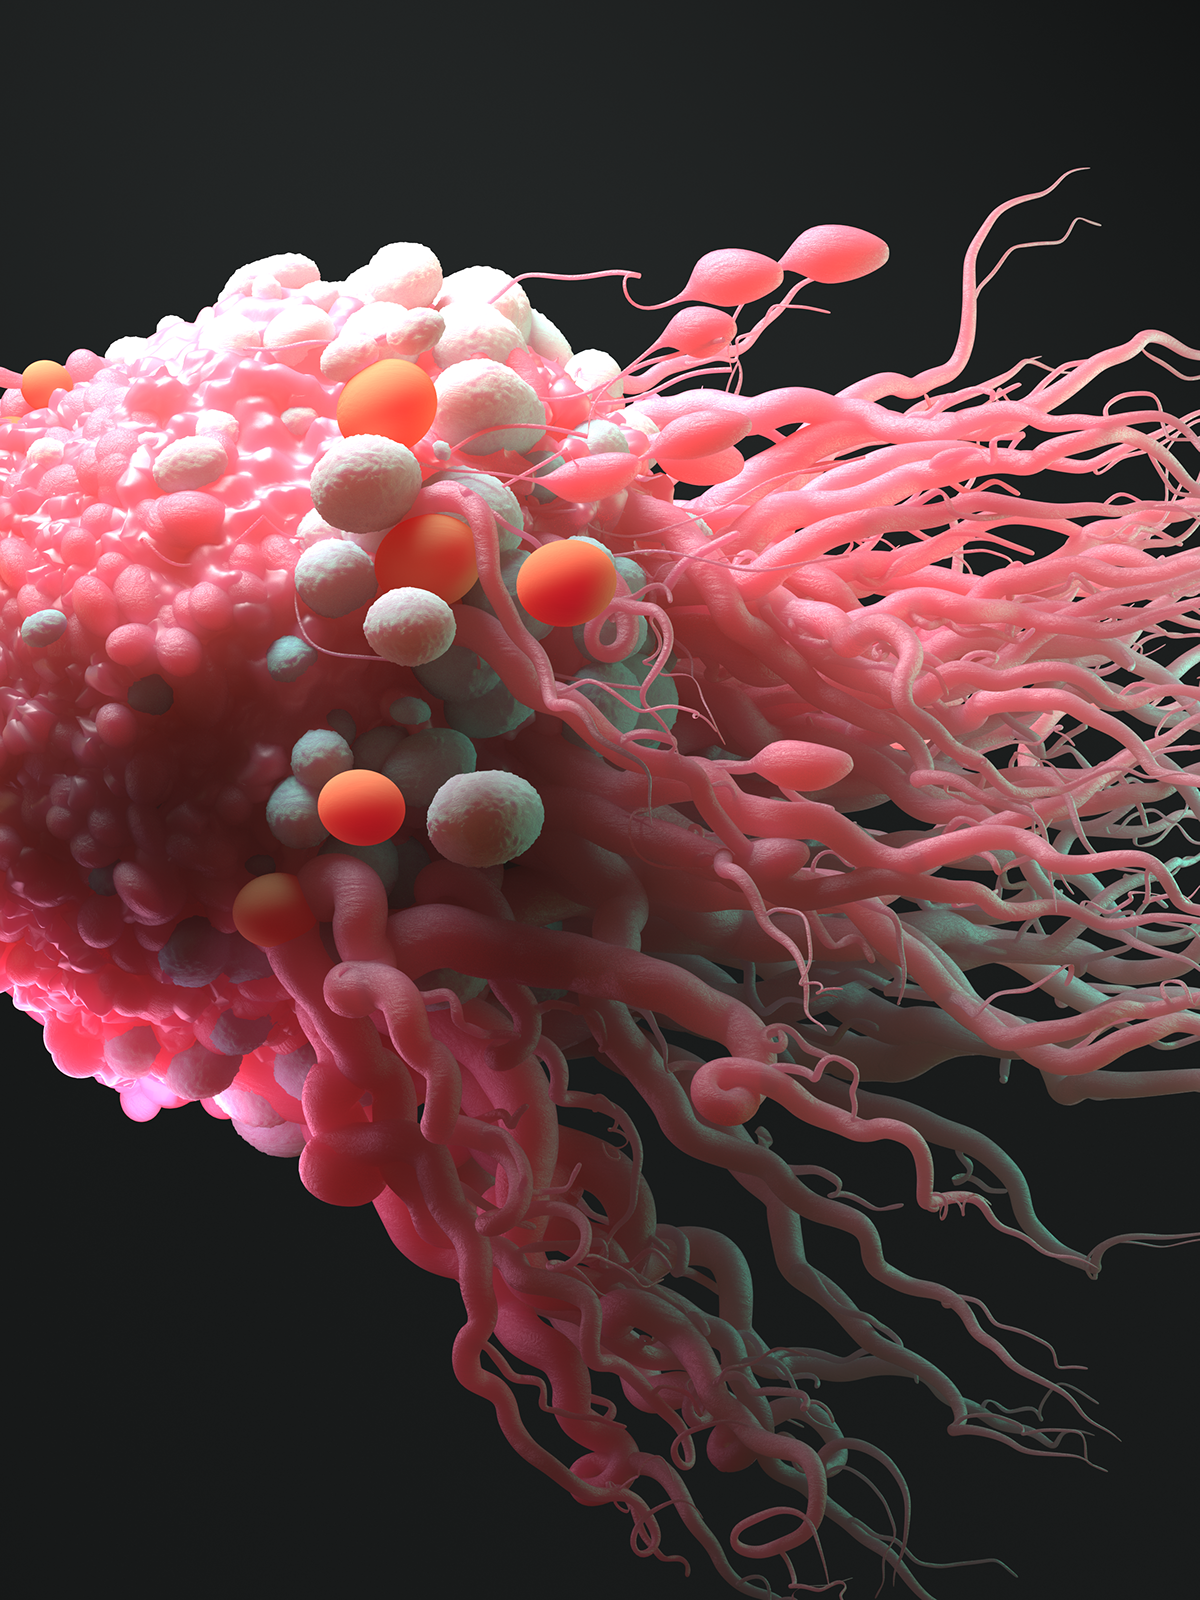 Cancer Cell Division on Behance2b935b77860021.5c93c1e5e7d12.png